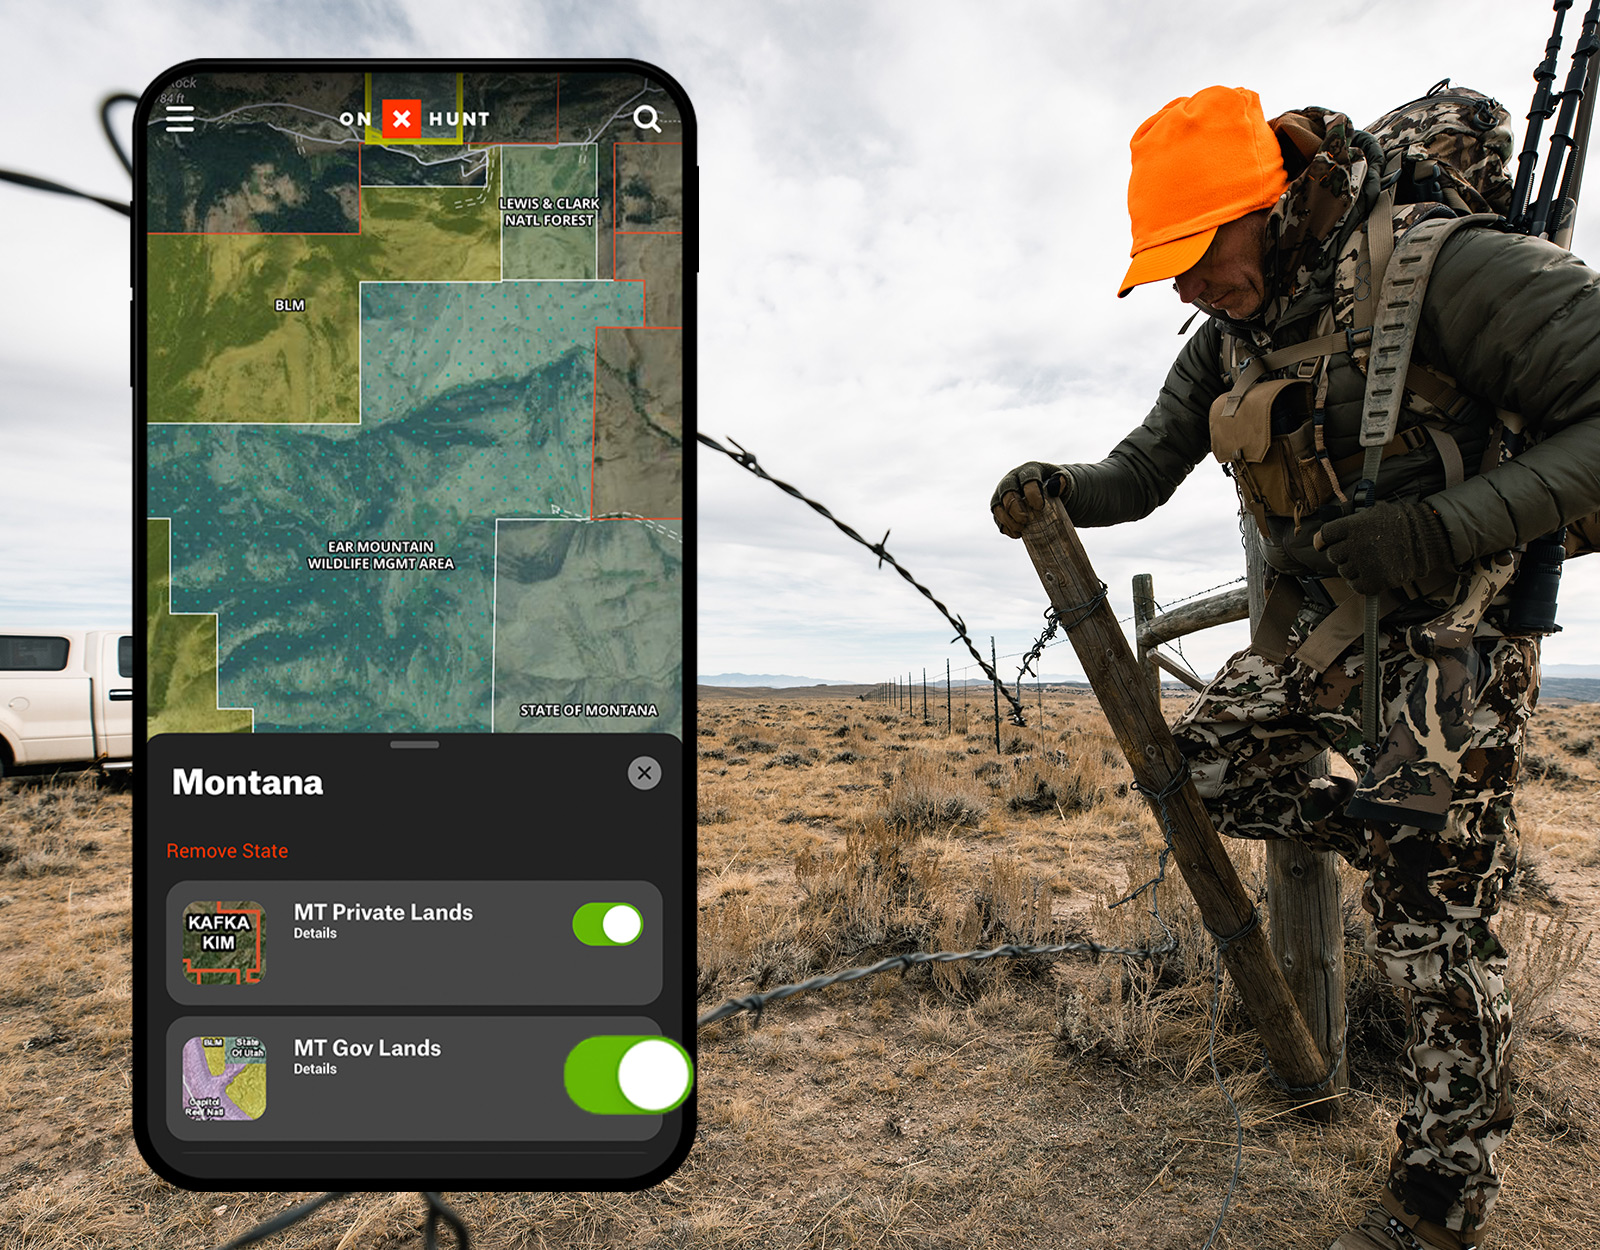 man crossing fence line while hunting. There is a view of the onX hunt app with the private and publics lands view showing how the hunter use the app. 